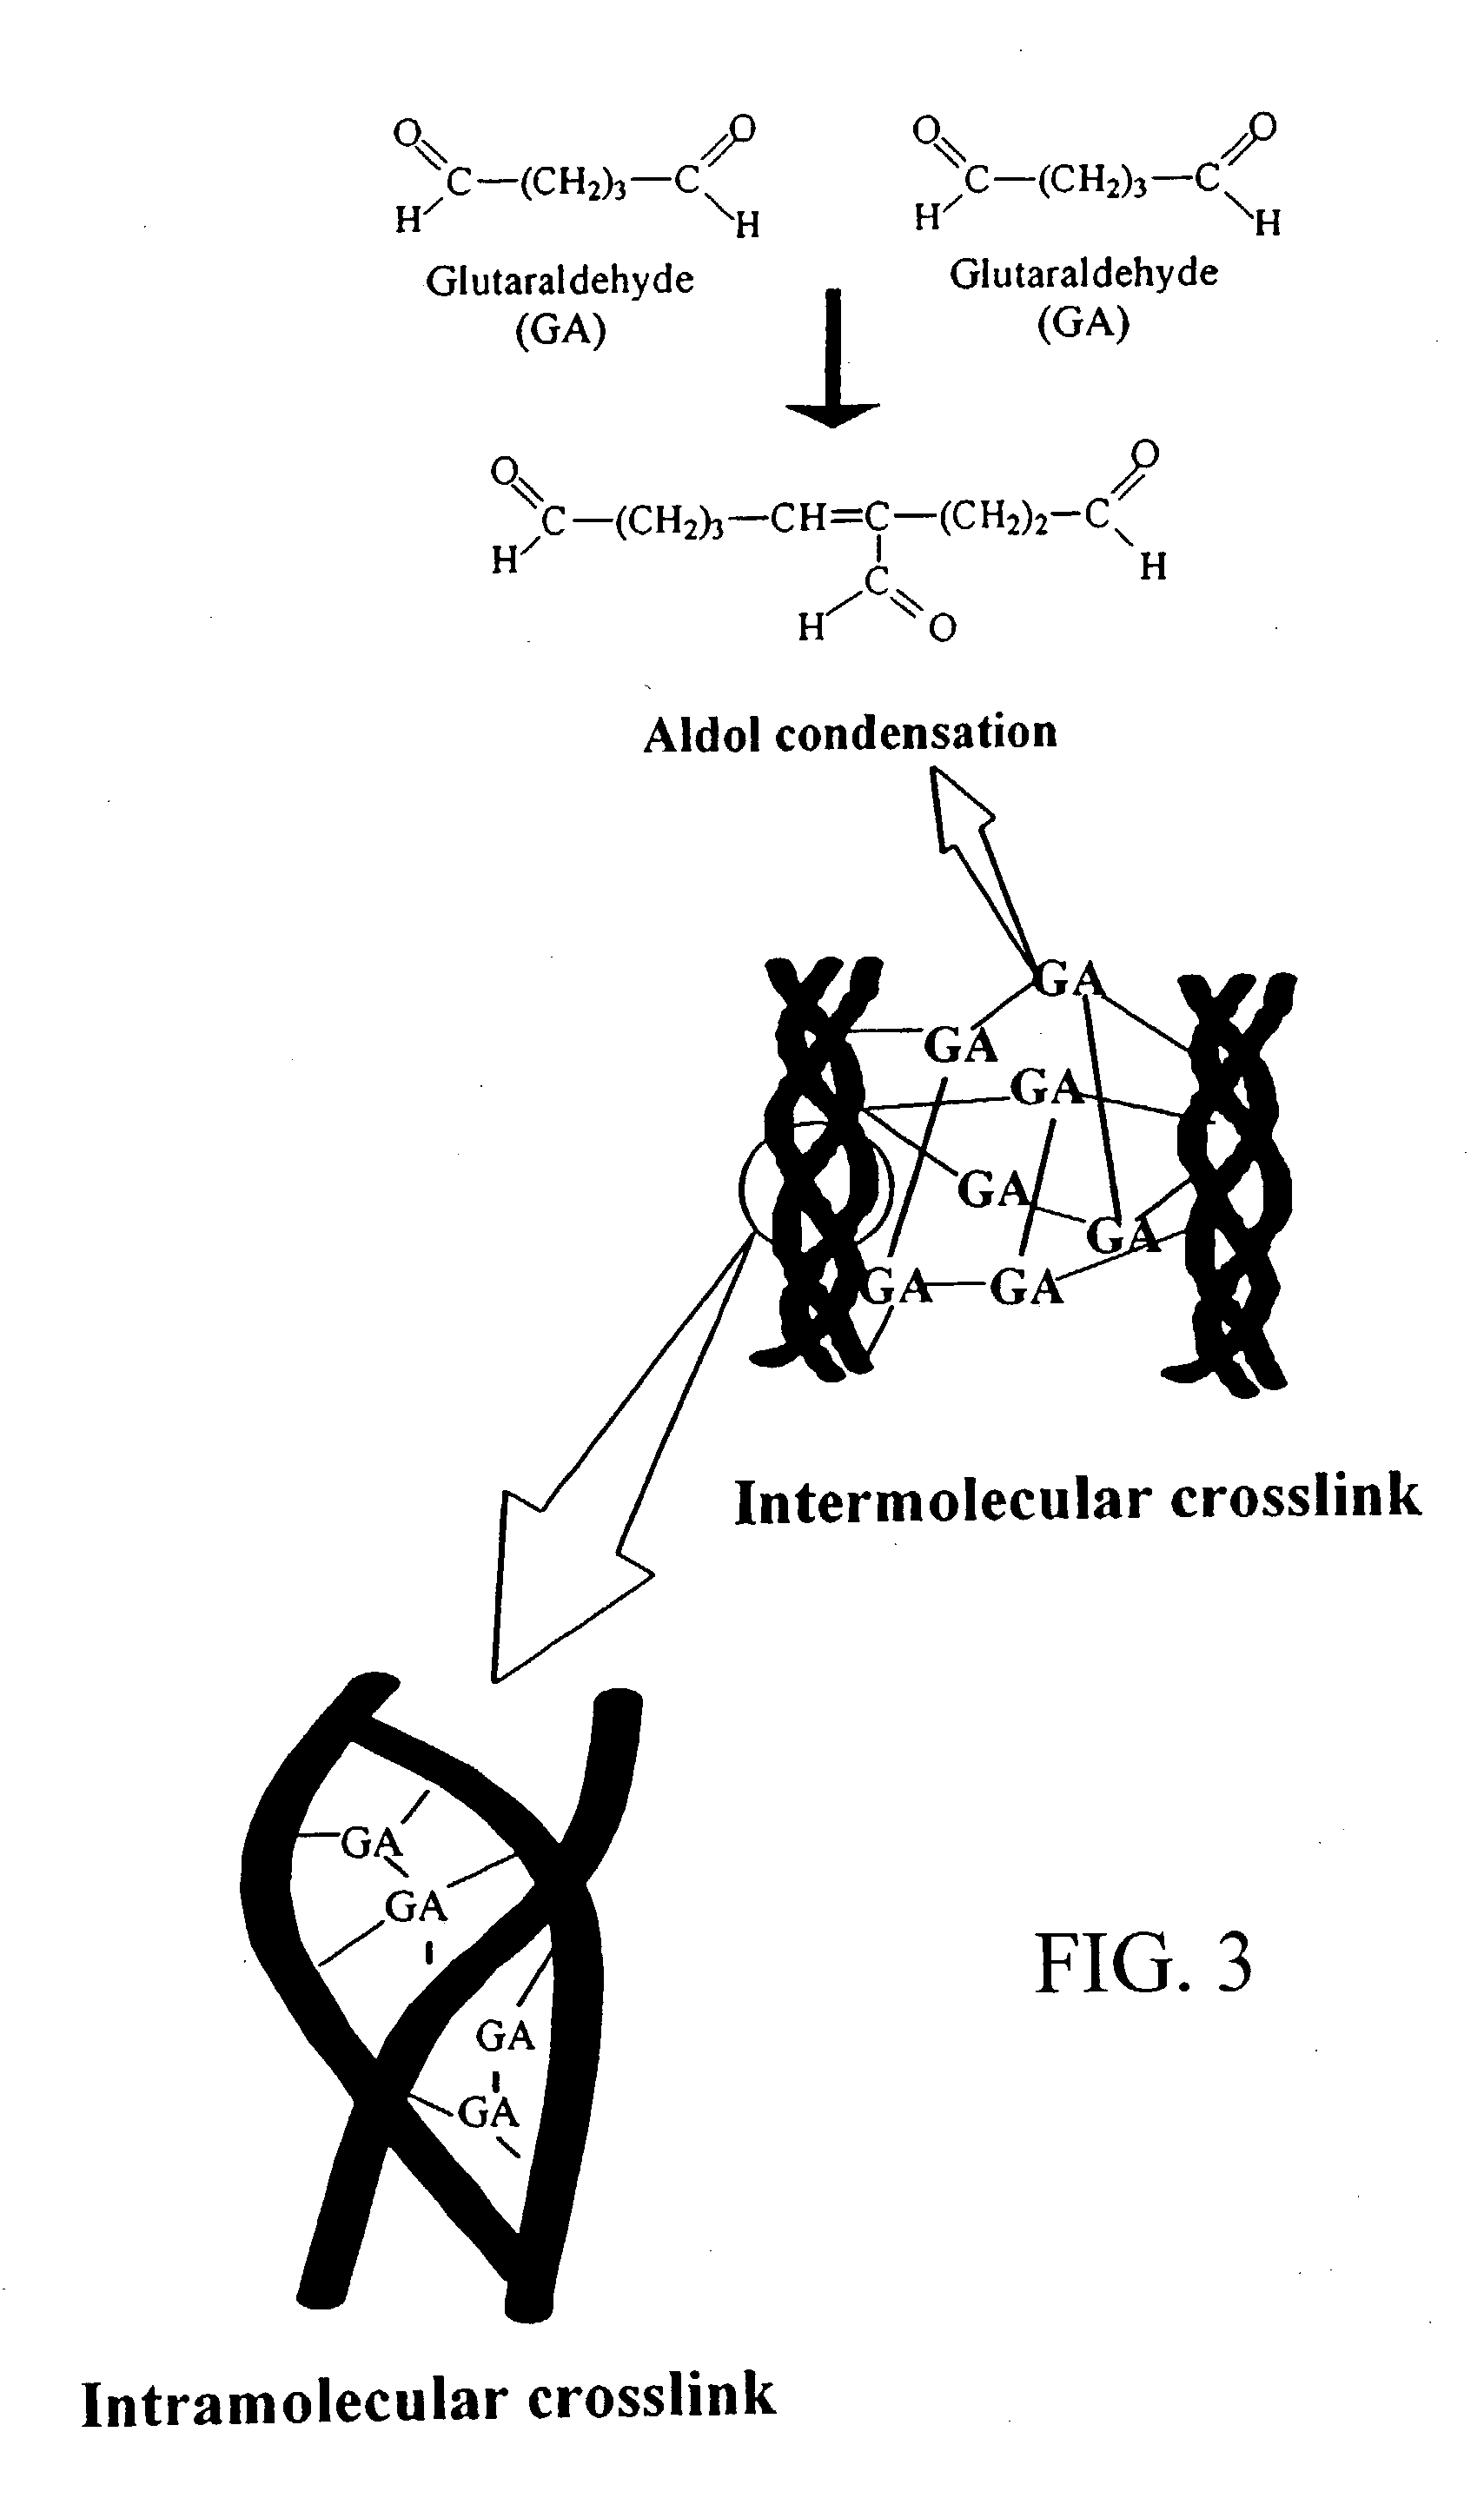 Drug-eluting device chemically treated with genipin